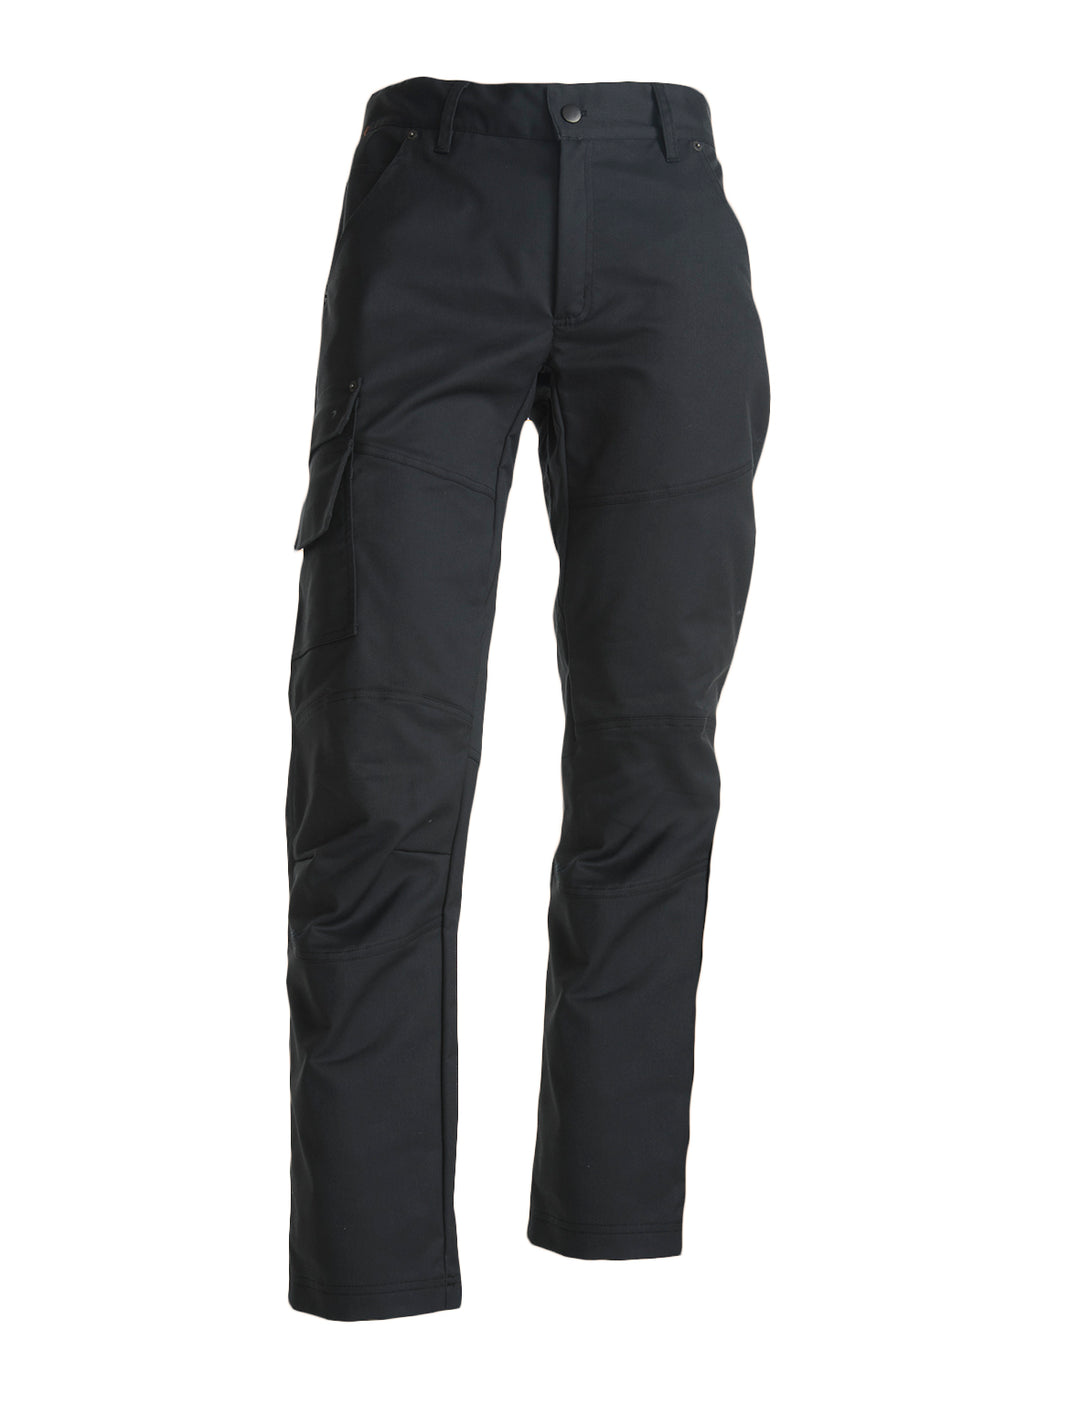 Men's stretch pants with thigh pocket